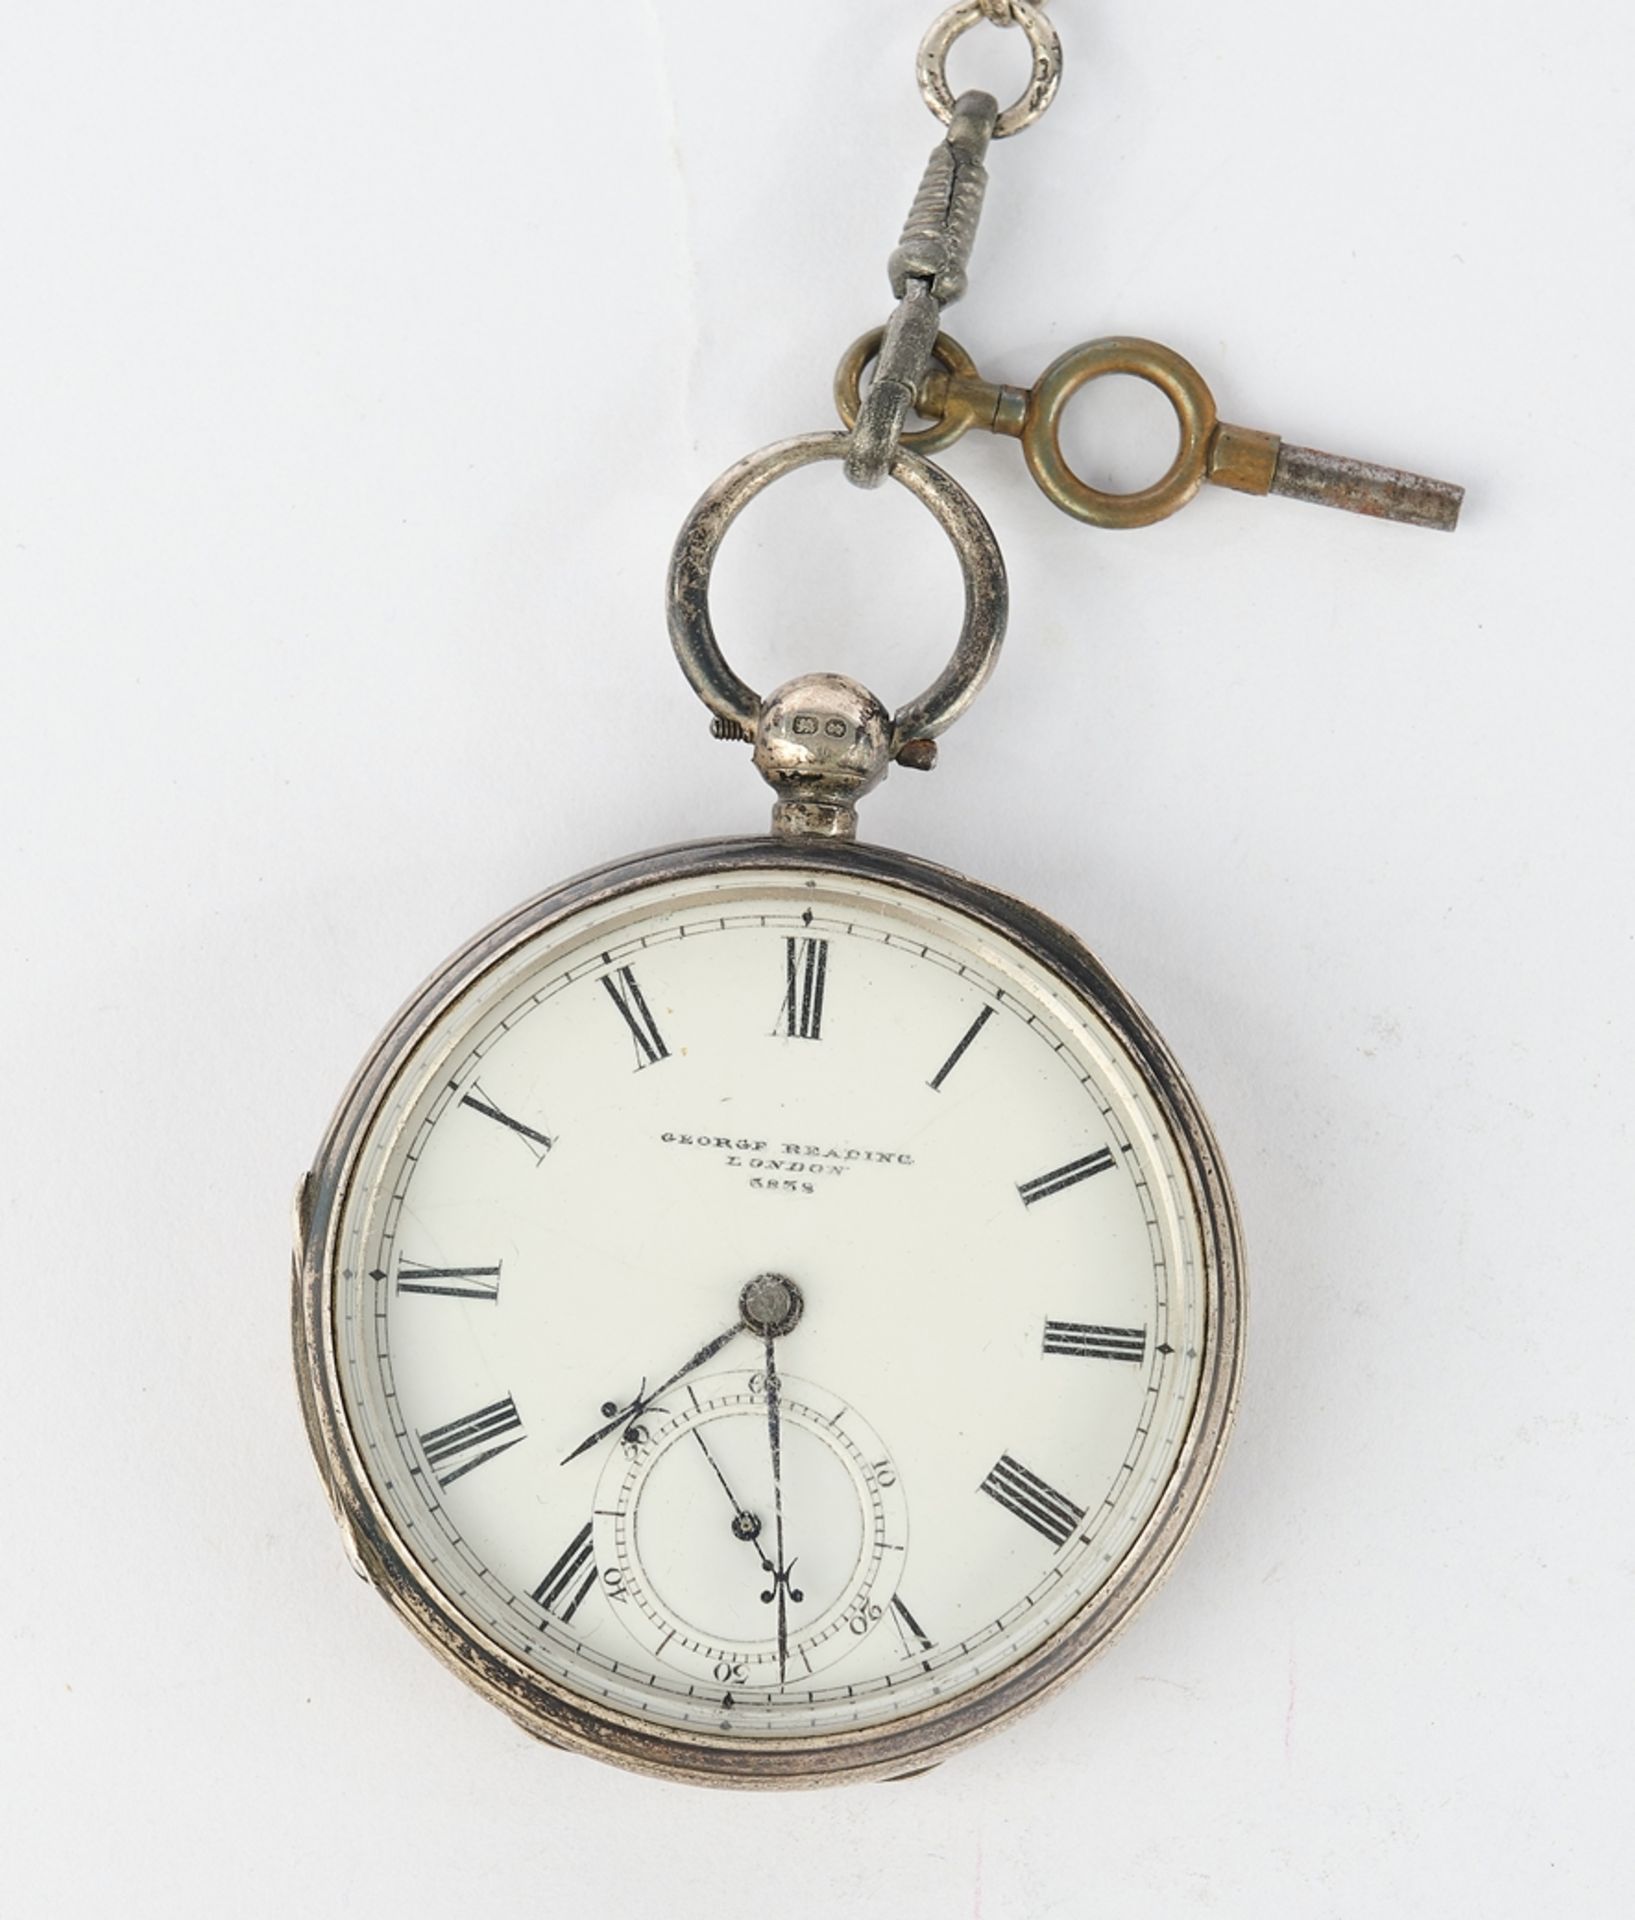 Spindle pocket watch, London, probably 1893, silver case, white enamelled dial sign. "George Readin - Image 2 of 6